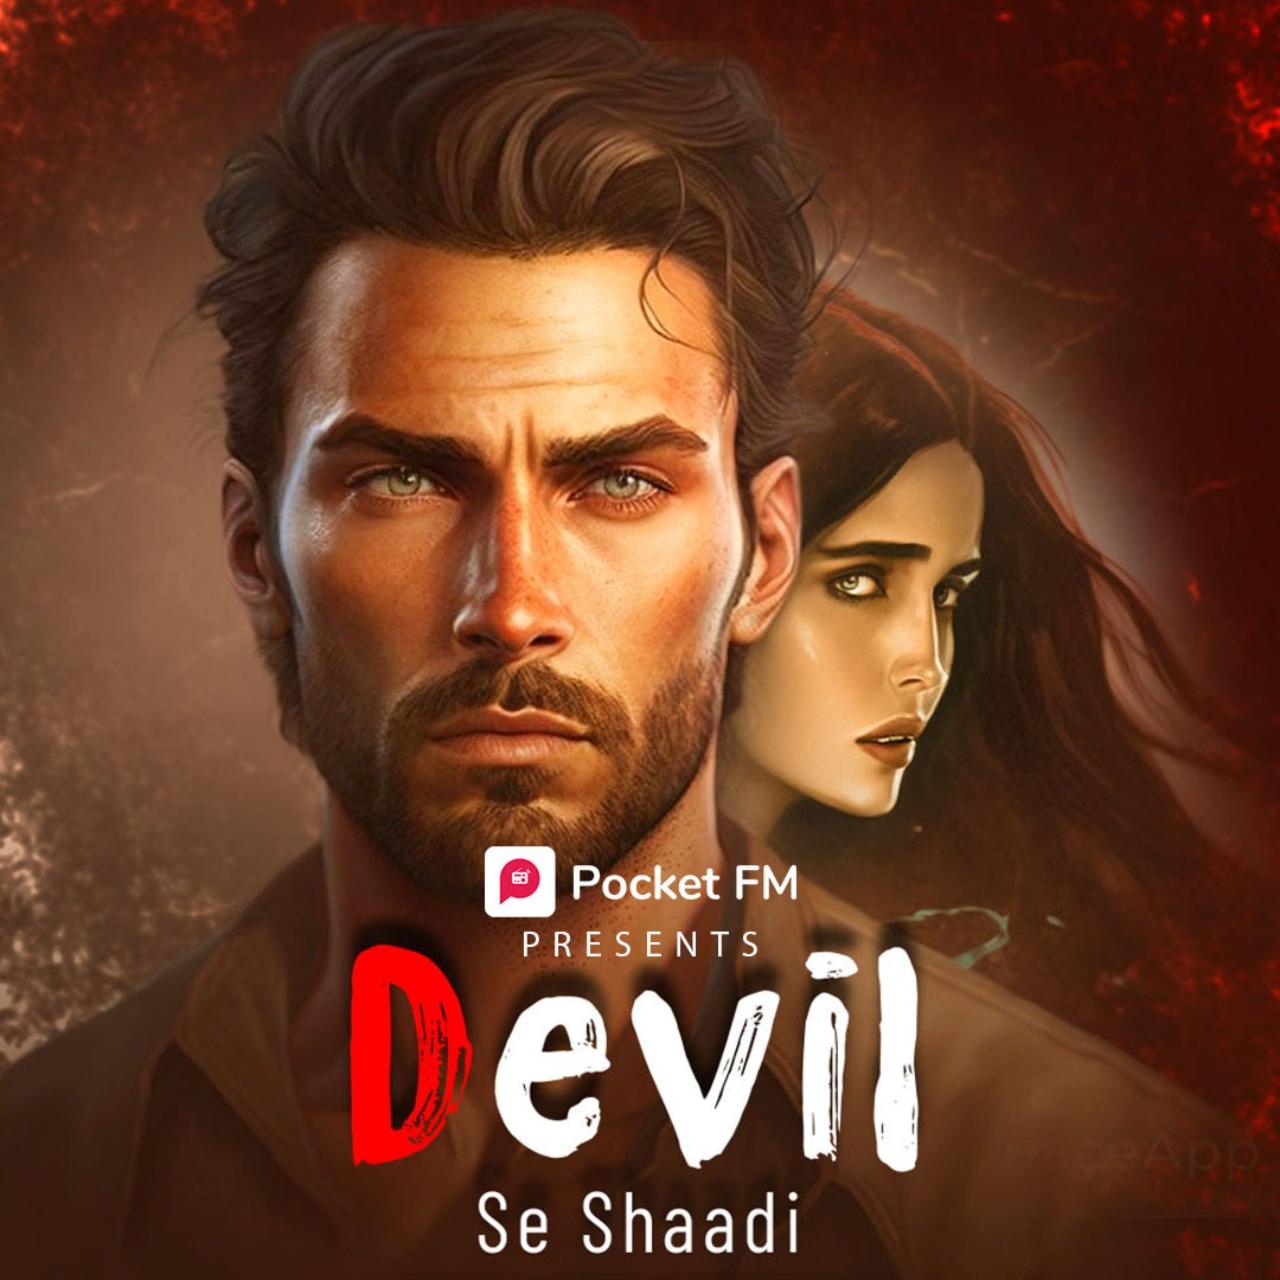 Are you seeking a way to celebrate Women's Day that is both entertaining and empowering? Look no further than 'Devil Ki Shaadi', the acclaimed audio series exclusively available on Pocket FM. Through its captivating narrative, the series follows Ishqi, a young woman who stands up against the patriarchal norms that constrain her into an unwanted marriage. Despite her fears of Rajveer's reputation, Ishqi refuses to be a victim and instead fights for her agency and rights. As the story unfolds, we witness her navigating the obstacles that arise from this unexpected turn of events. Will she yield to the pressure or hold firm and blaze her own trail? Ishqi's determination to break free from societal expectations and chart her path is truly inspiring, with each episode bringing us closer to her journey of empowerment. With compelling storytelling, memorable characters, and a resounding message of female empowerment, 'Devil Ki Shaadi' is the ideal way to celebrate the phenomenal women in our lives this Women's Day. So tune in and prepare yourself for an unforgettable experience!